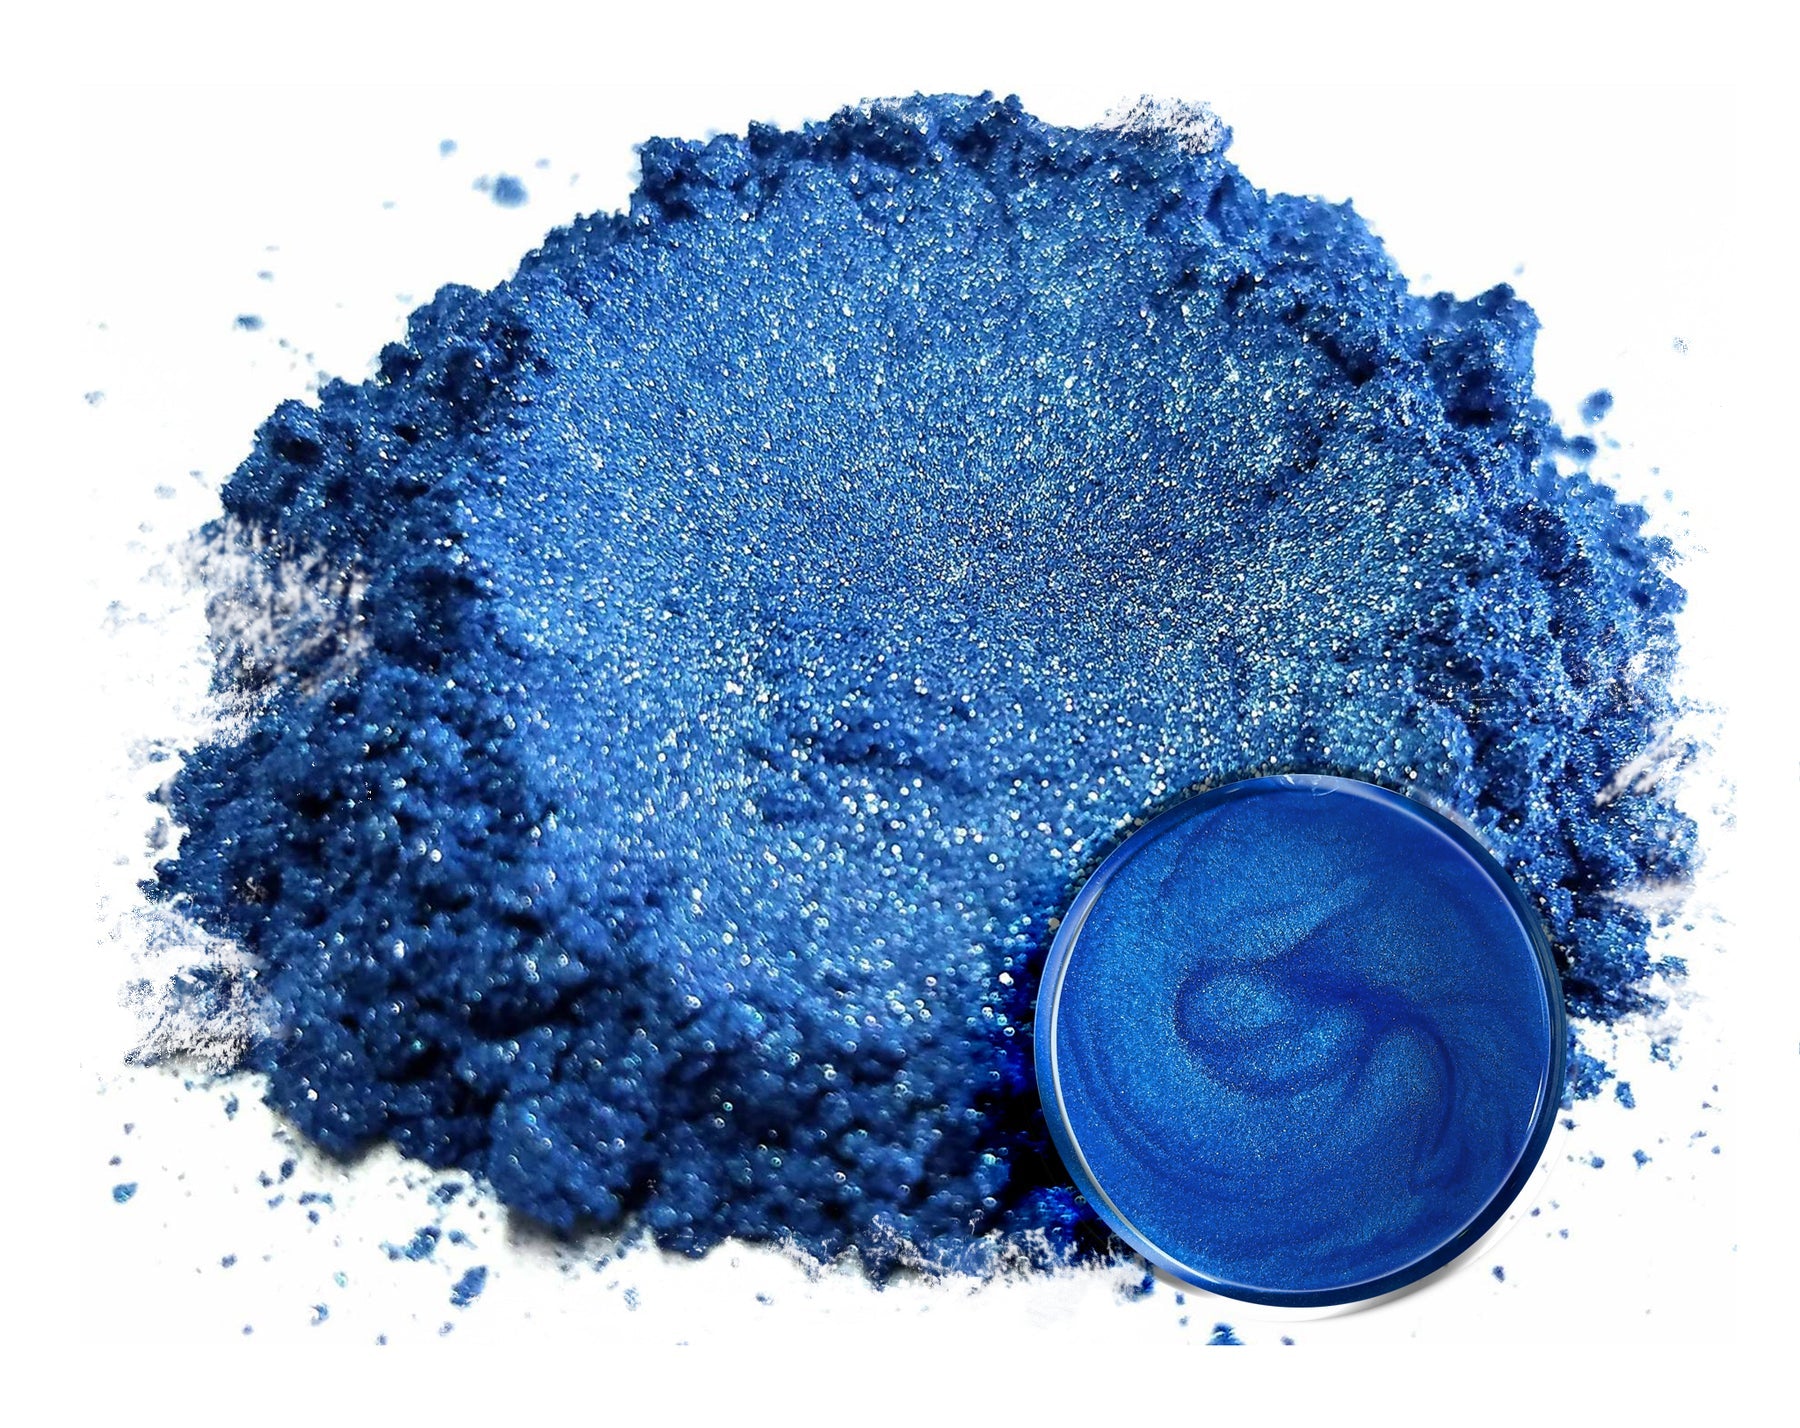 Powdered pigment by eye candy pigments for epoxy resin projects. In the color Ocean Blue.